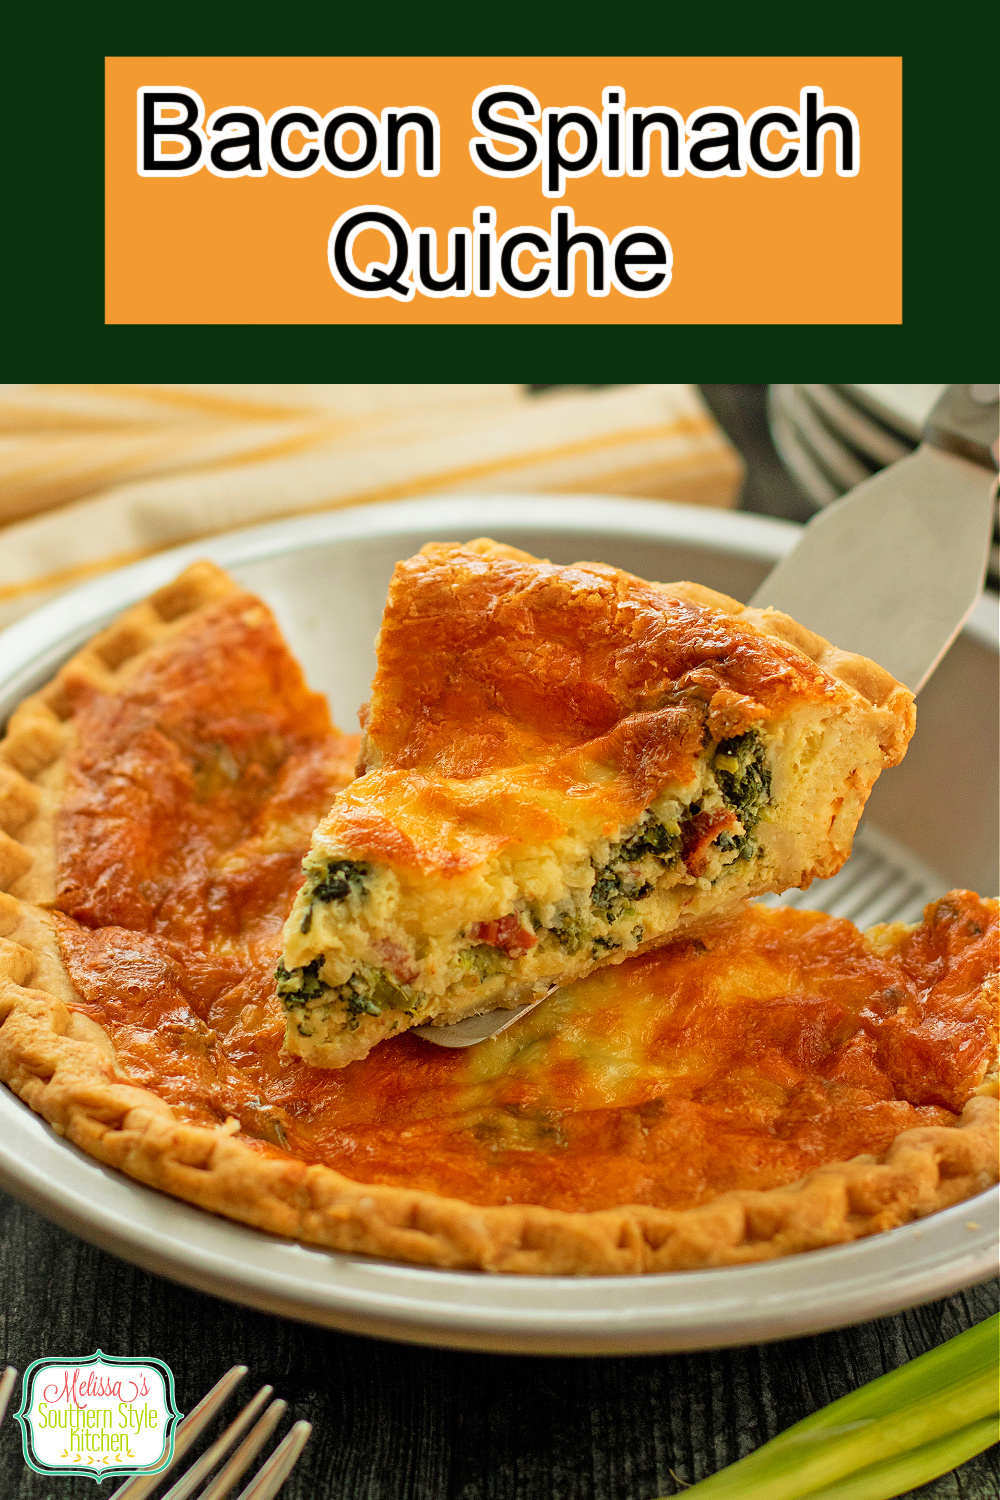 This easy Bacon Spinach Quiche recipe is ideal for weekend brunches and special holiday gatherings #quicherecipes #spinachquiche #baconquiche #baconspinachquiche #brunchrecipes #baconrecipes #easyquicherecipes